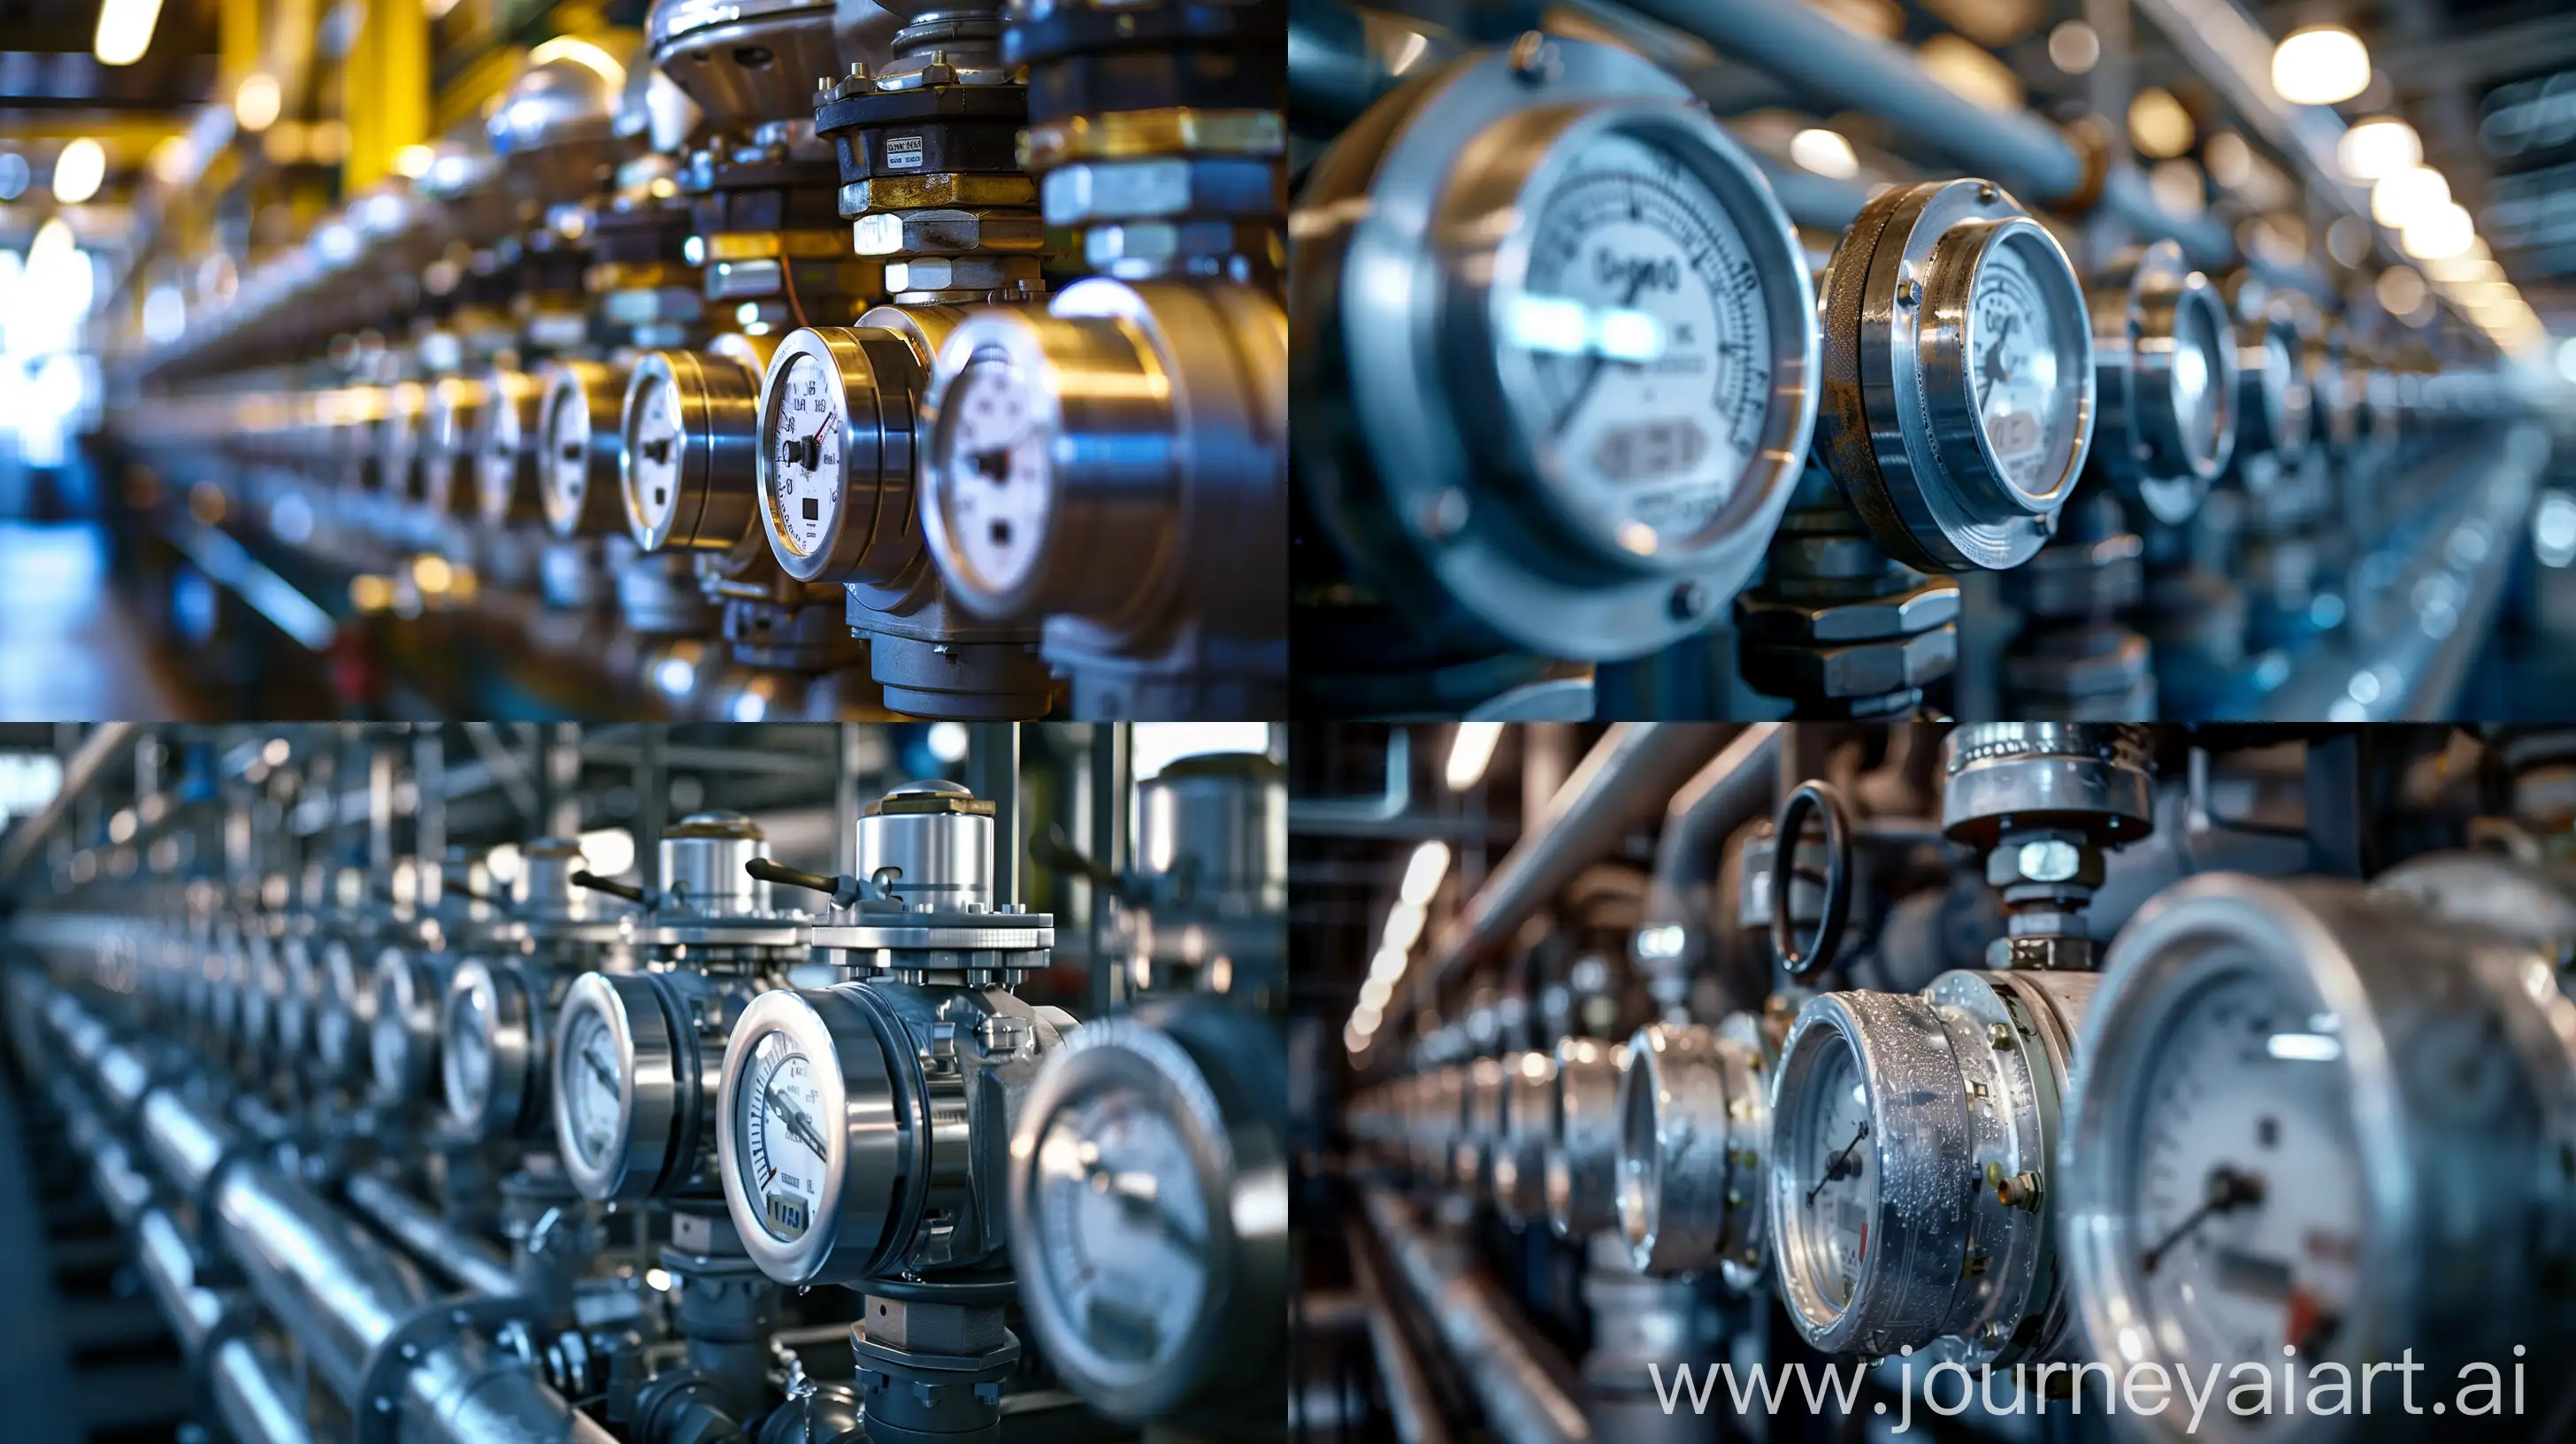 Durable-Water-Meters-in-Industrial-Setting-Robustness-Captured-in-HighResolution-Photograph